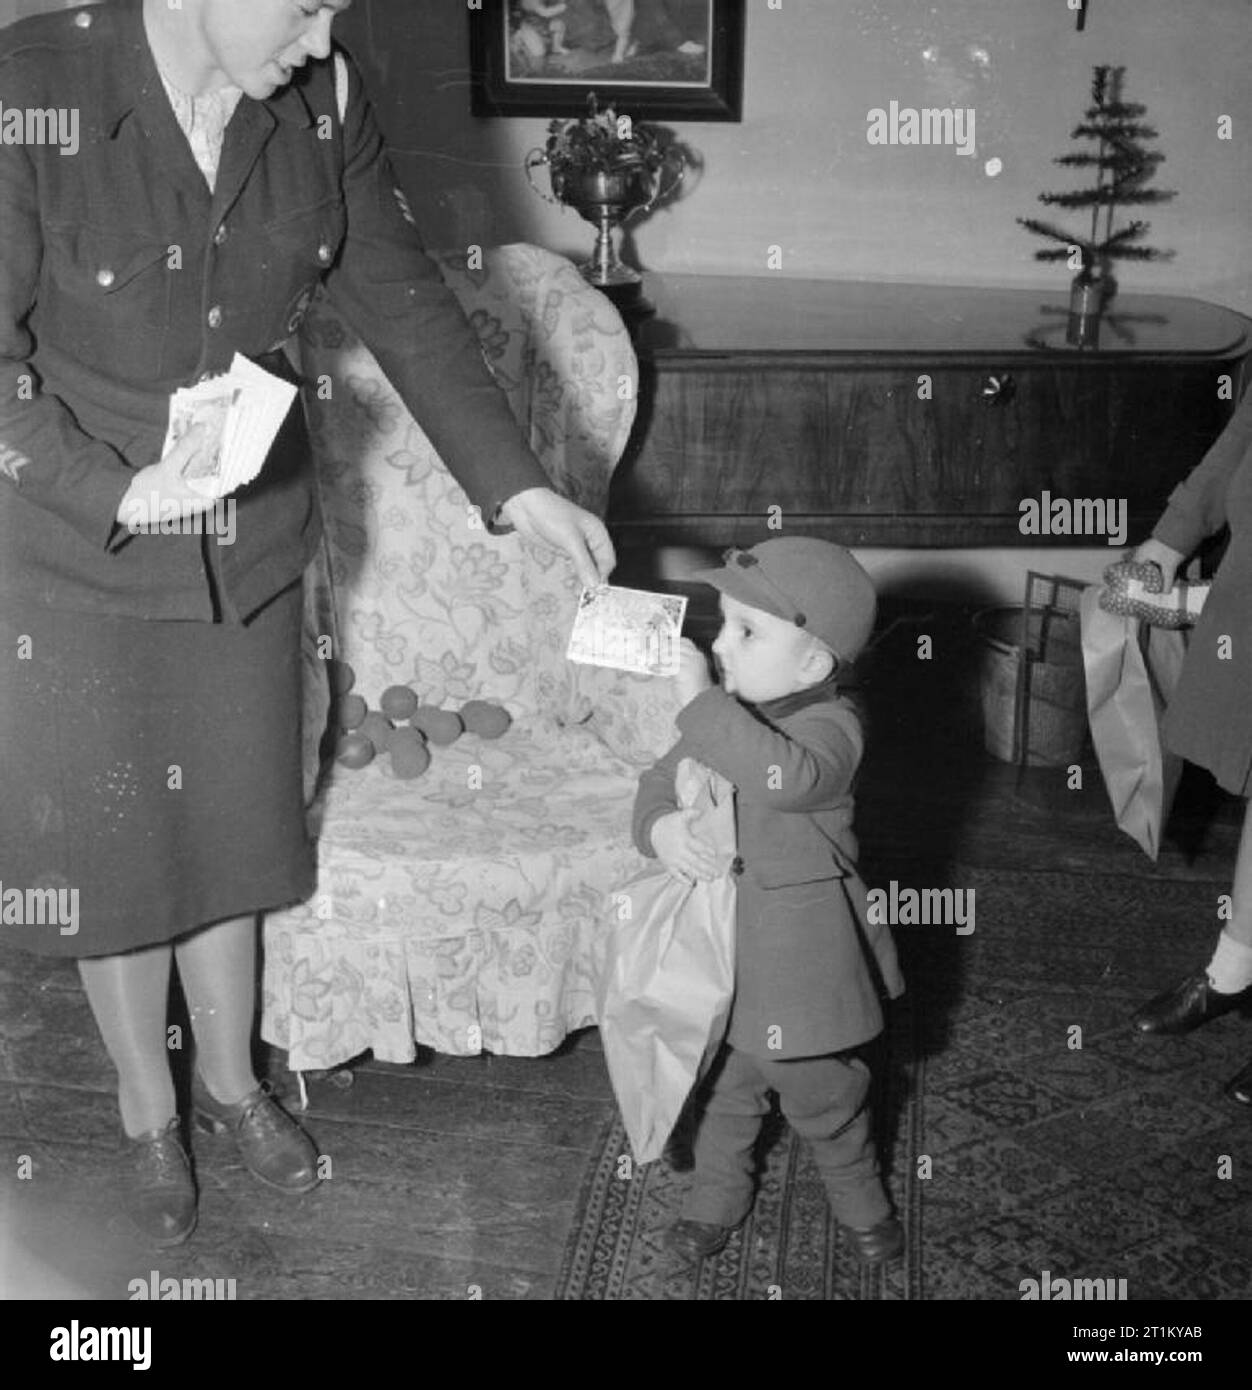 Bwrs Christmas Gifts Distributed To London's East Enders- American Aid To the Canning Town Settlement, London, England, UK, December 1944 At the Canning Town settlement, Derek Cunningham receives a Christmas card and savings stamp. In addition, he is holding a paper bag containing a new toy and some sweets, donated as Christmas gifts by America through the British War Relief Society. Stock Photo